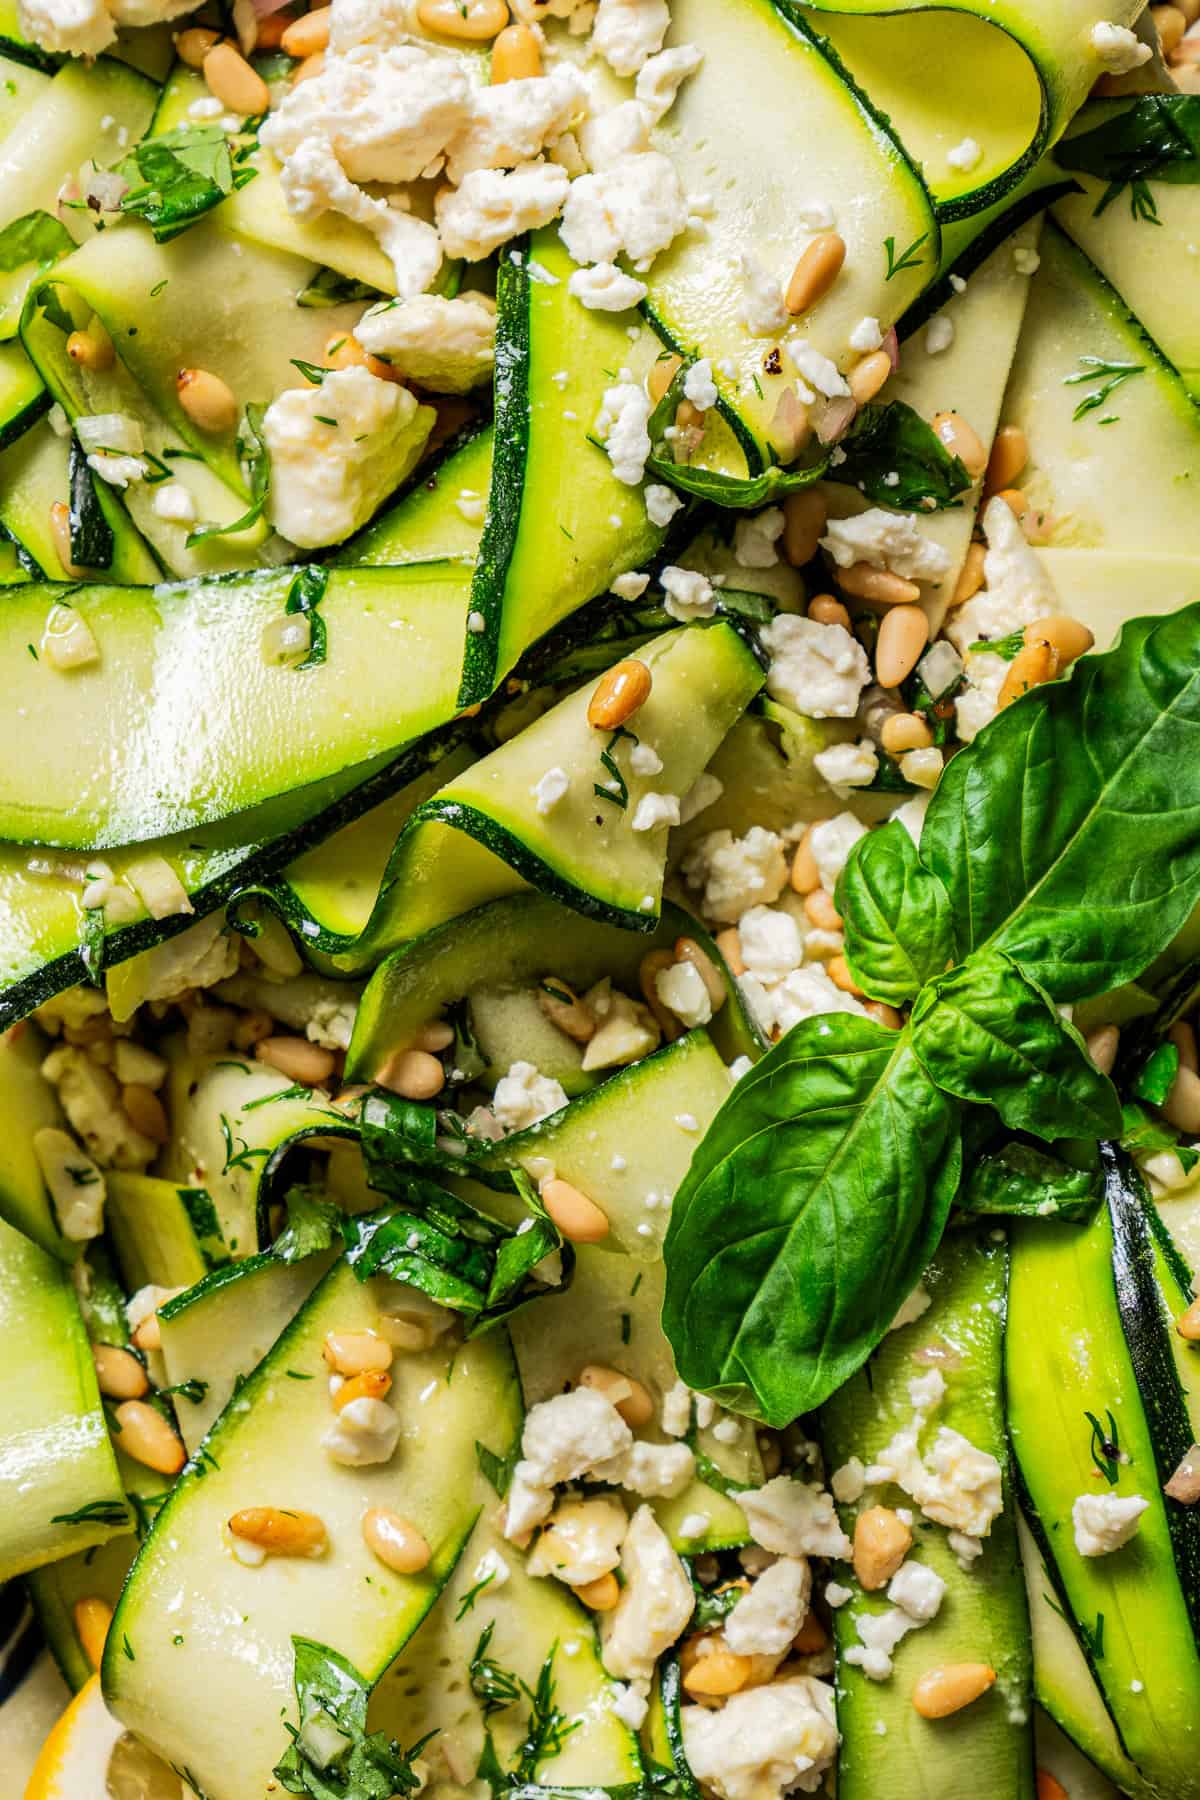 Close-up image of a zucchini salad tossed with nuts, white crumbles of cheese, and fresh basil.